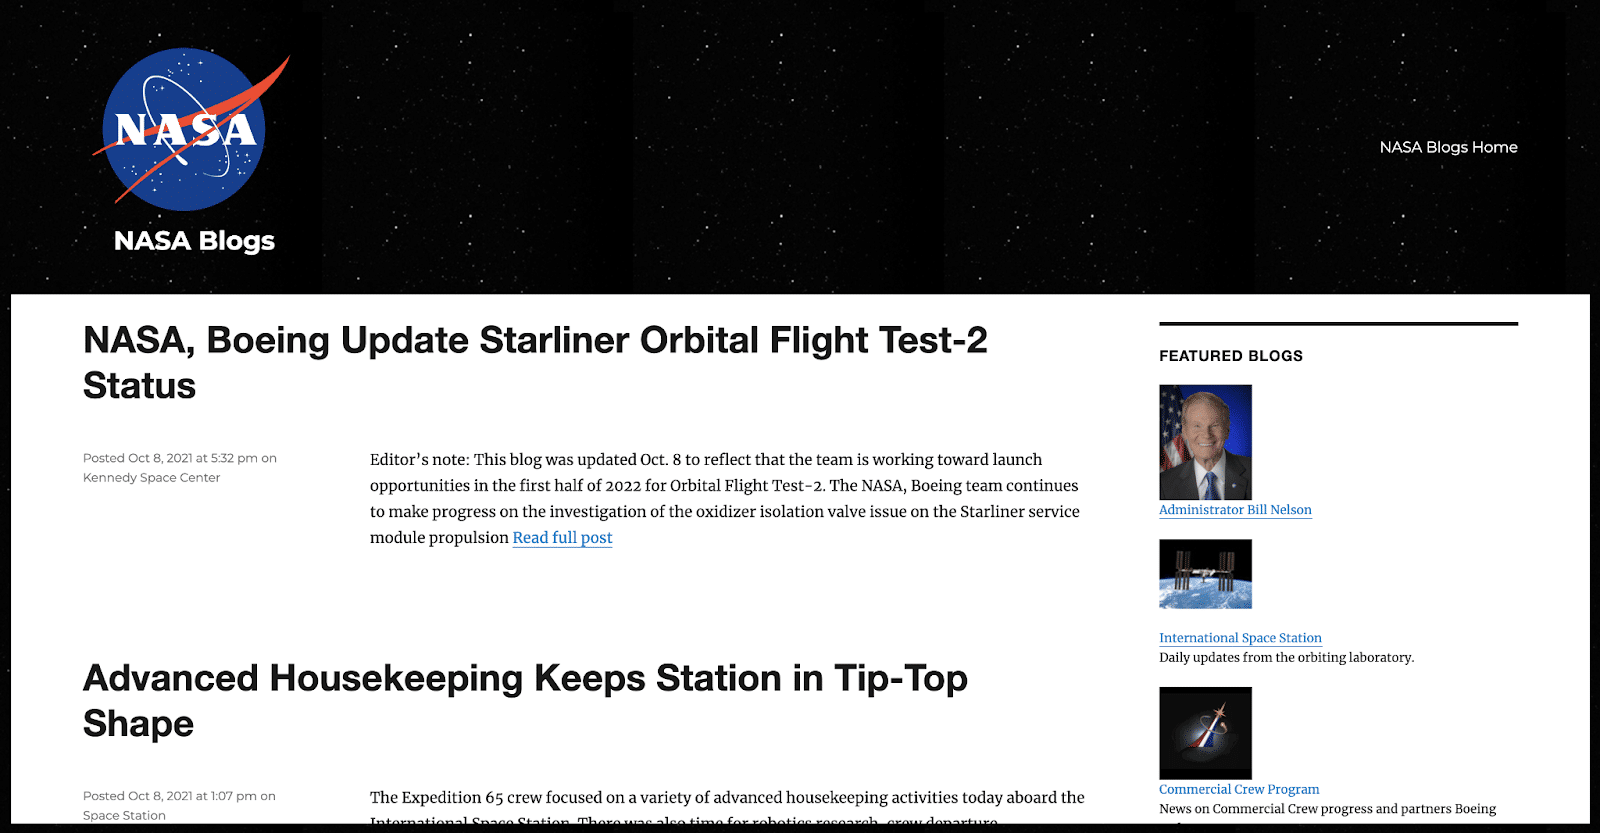 NASA uses an acronym in its blog name